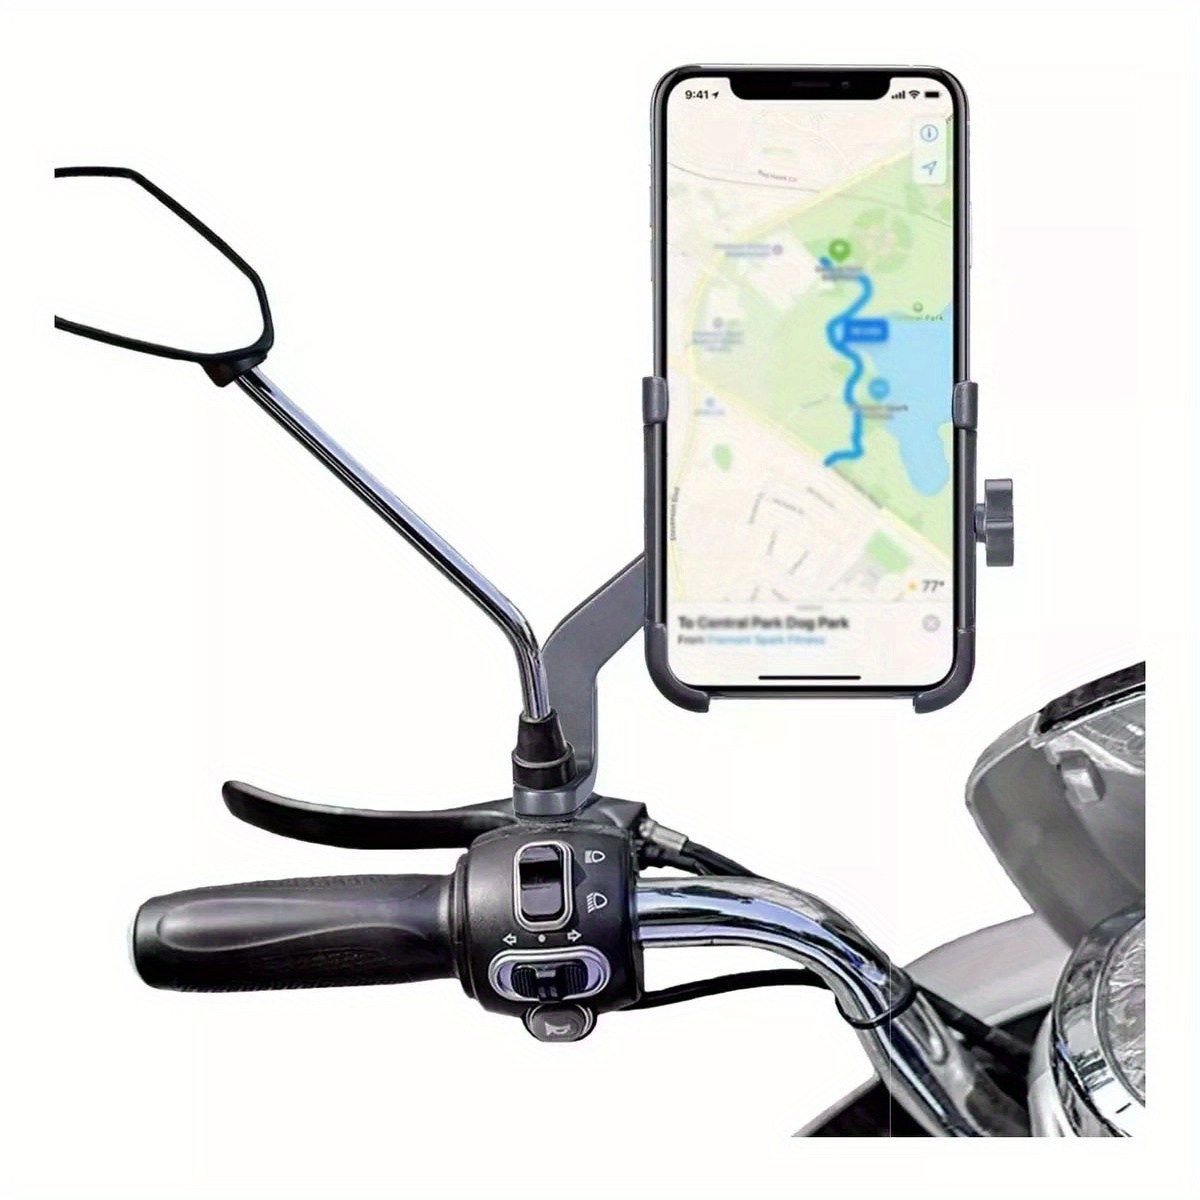 

1pc Motorcycle Phone Holder For Takeout, Rider Navigation, Electric Vehicle Mounted Shock-absorbing Phone Holder